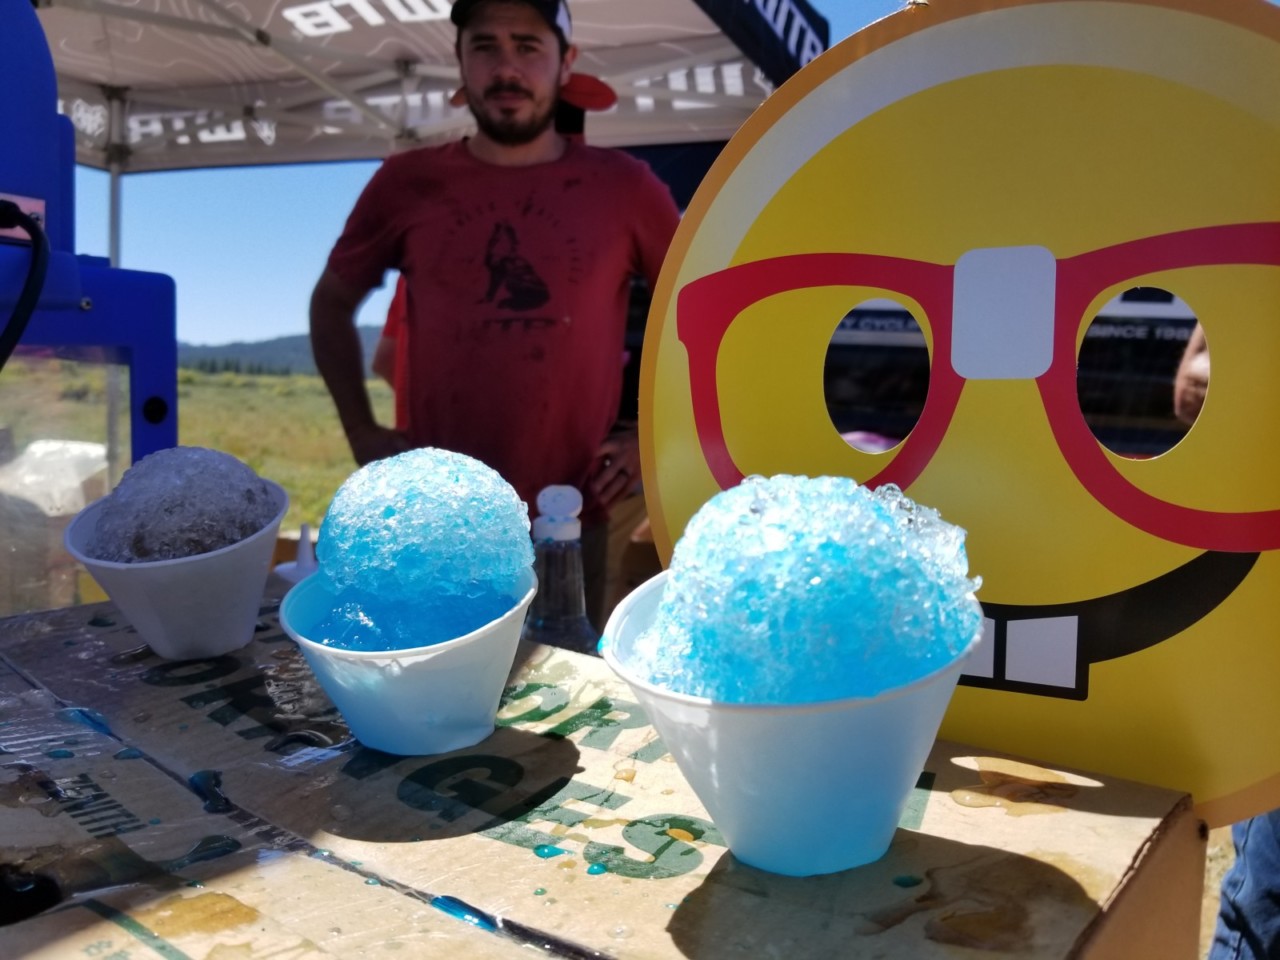 Snow banks and snow cones may await Lost and Found 2019 gravel race participants.